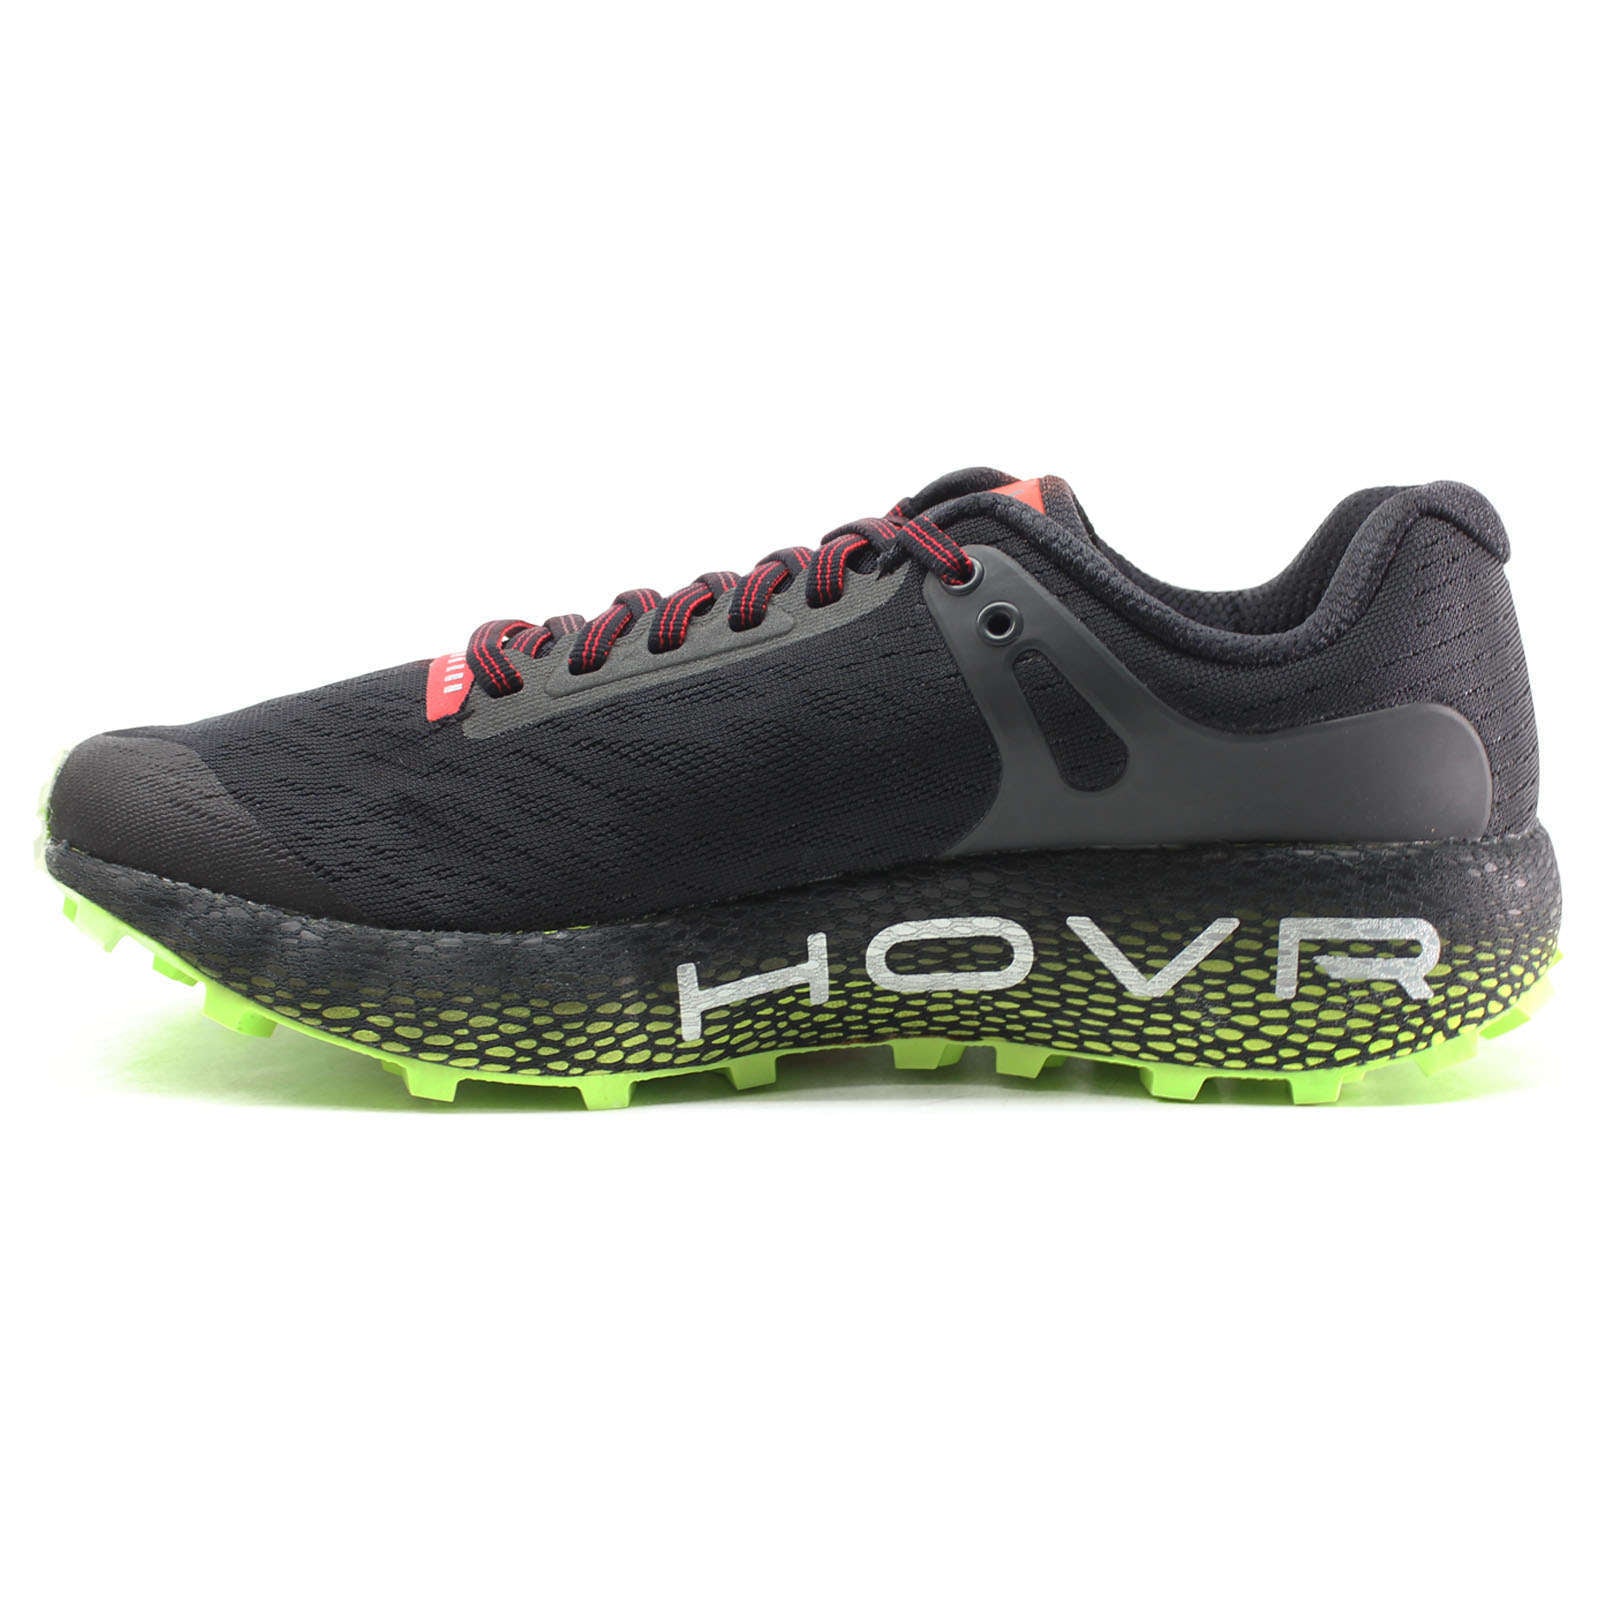 Under Armour HOVR Machina Off Road Synthetic Textile Men's Low-Top Trainers#color_black black